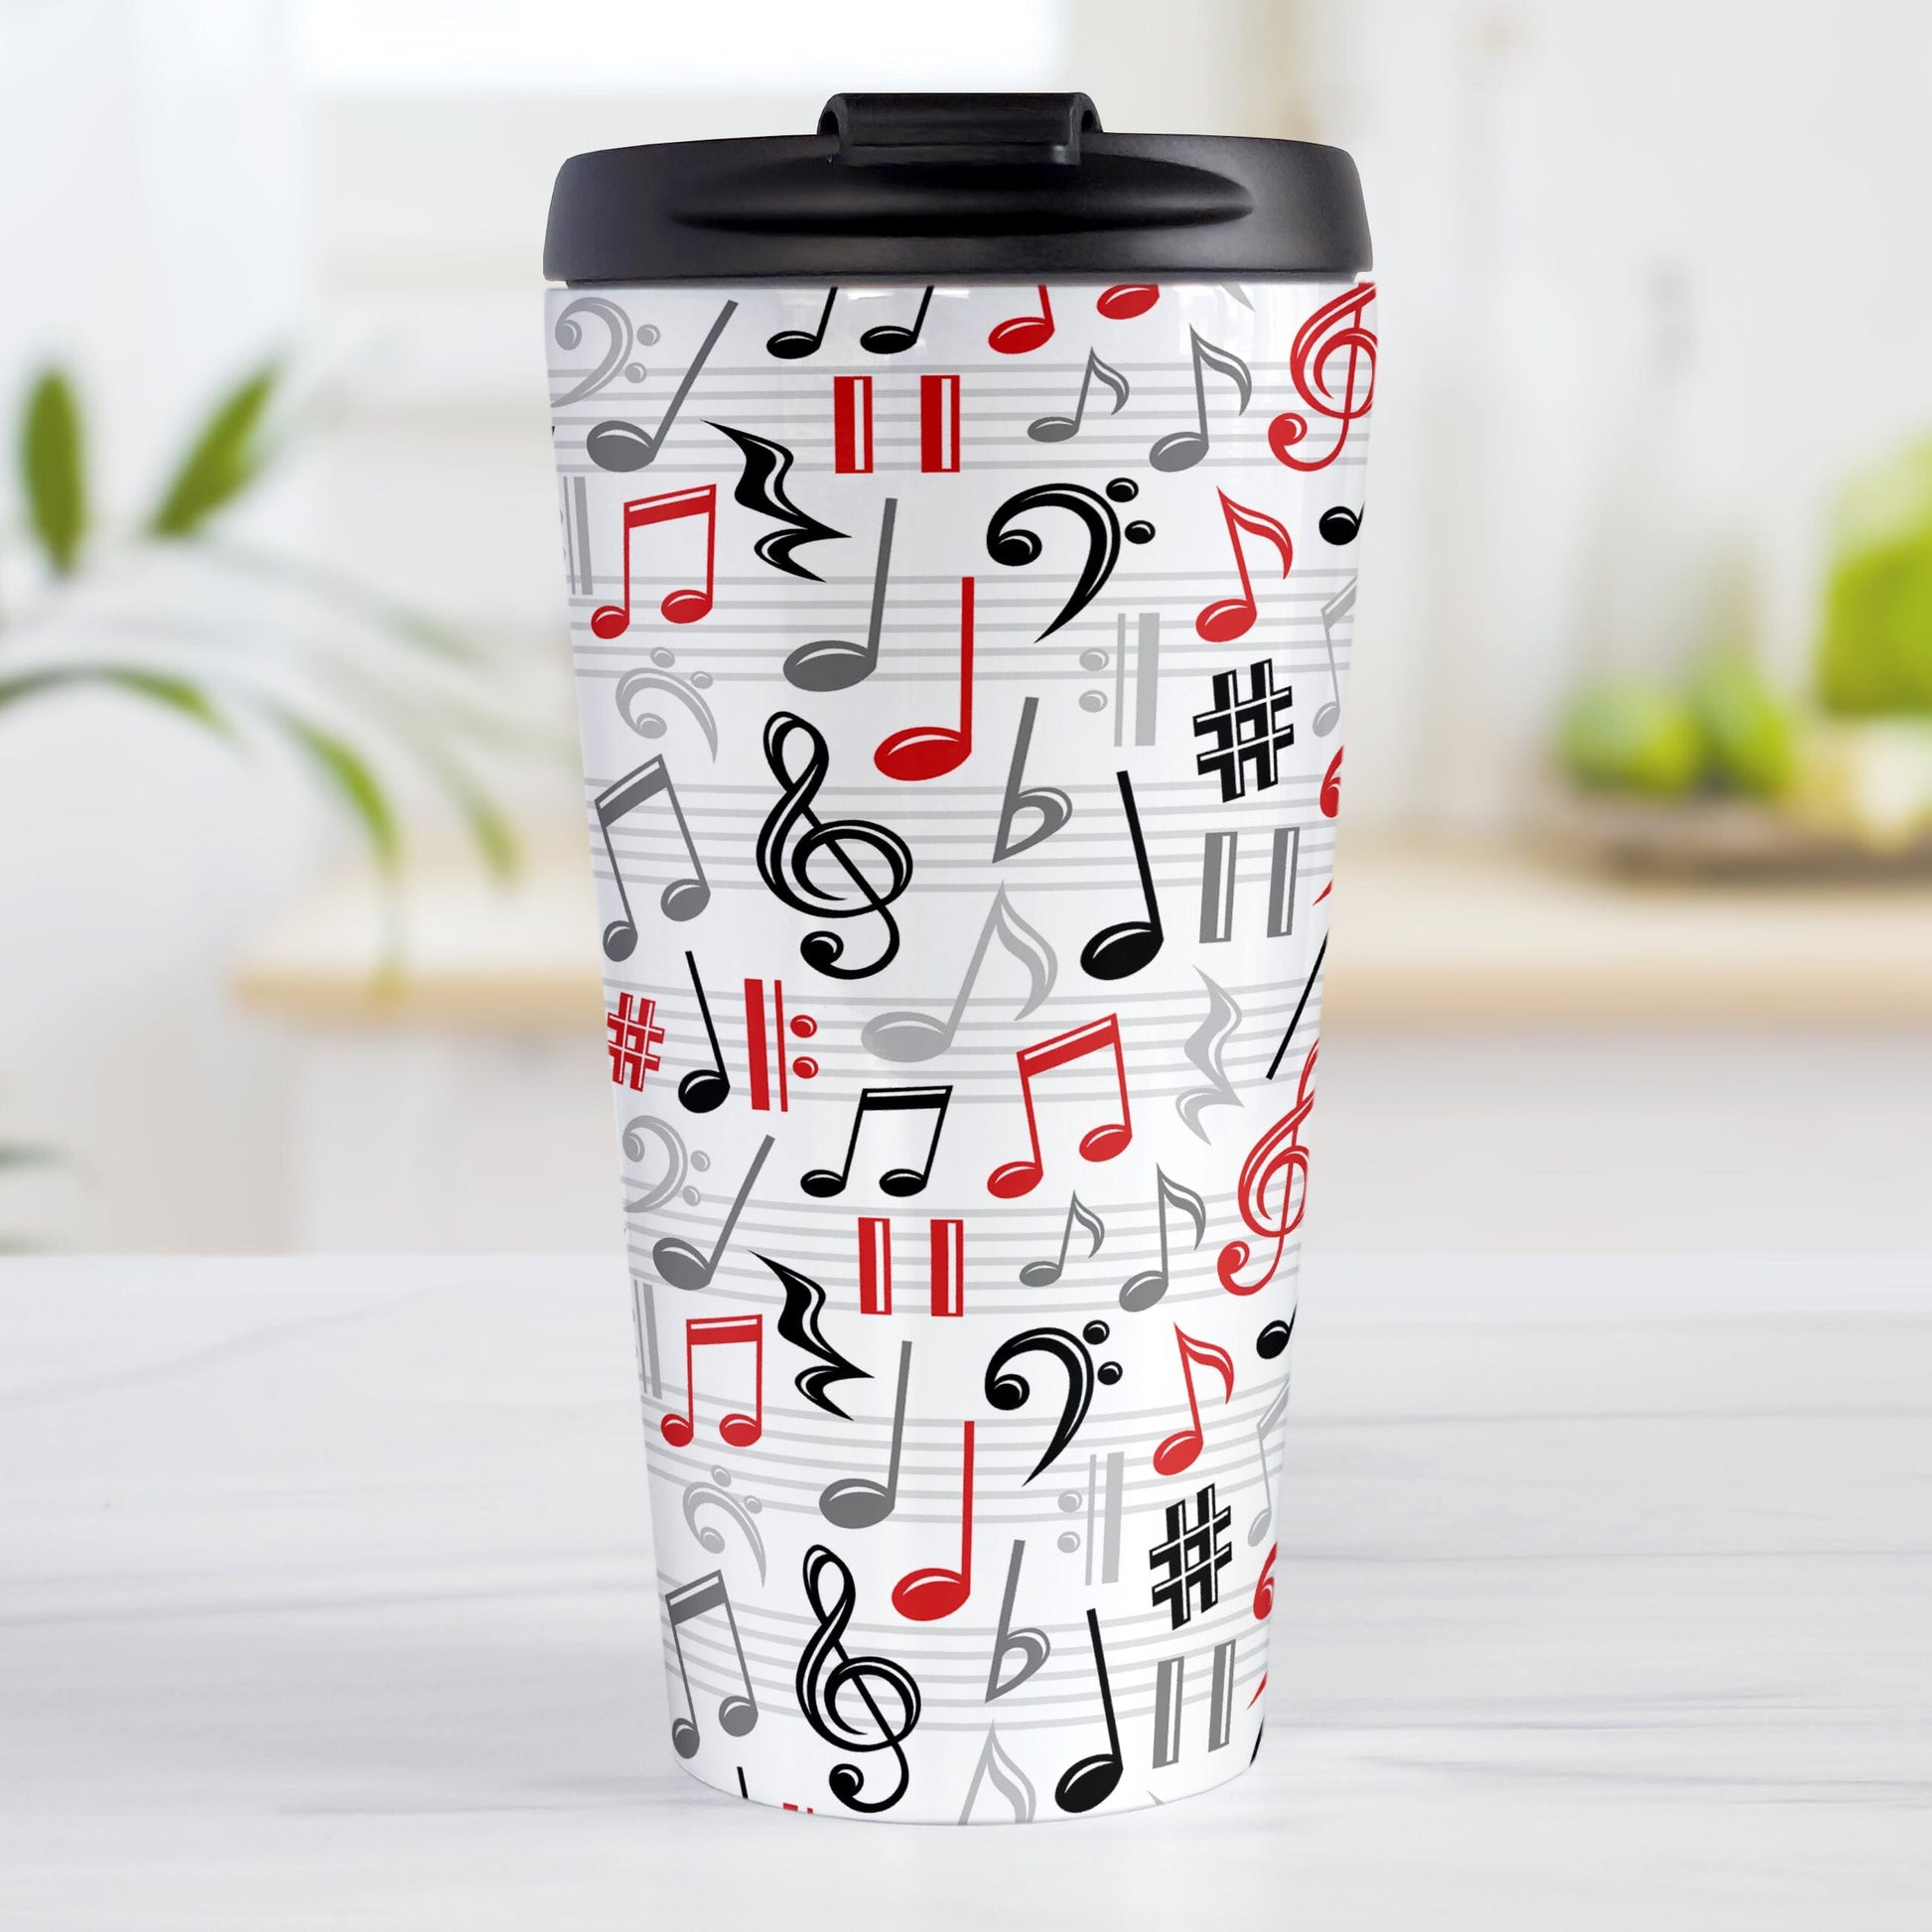 Red Music Notes Pattern Travel Mug (15oz) at Amy's Coffee Mugs. A stainless steel travel mug designed with music notes and symbols in red, black, and gray in a pattern that wraps around the travel mug.